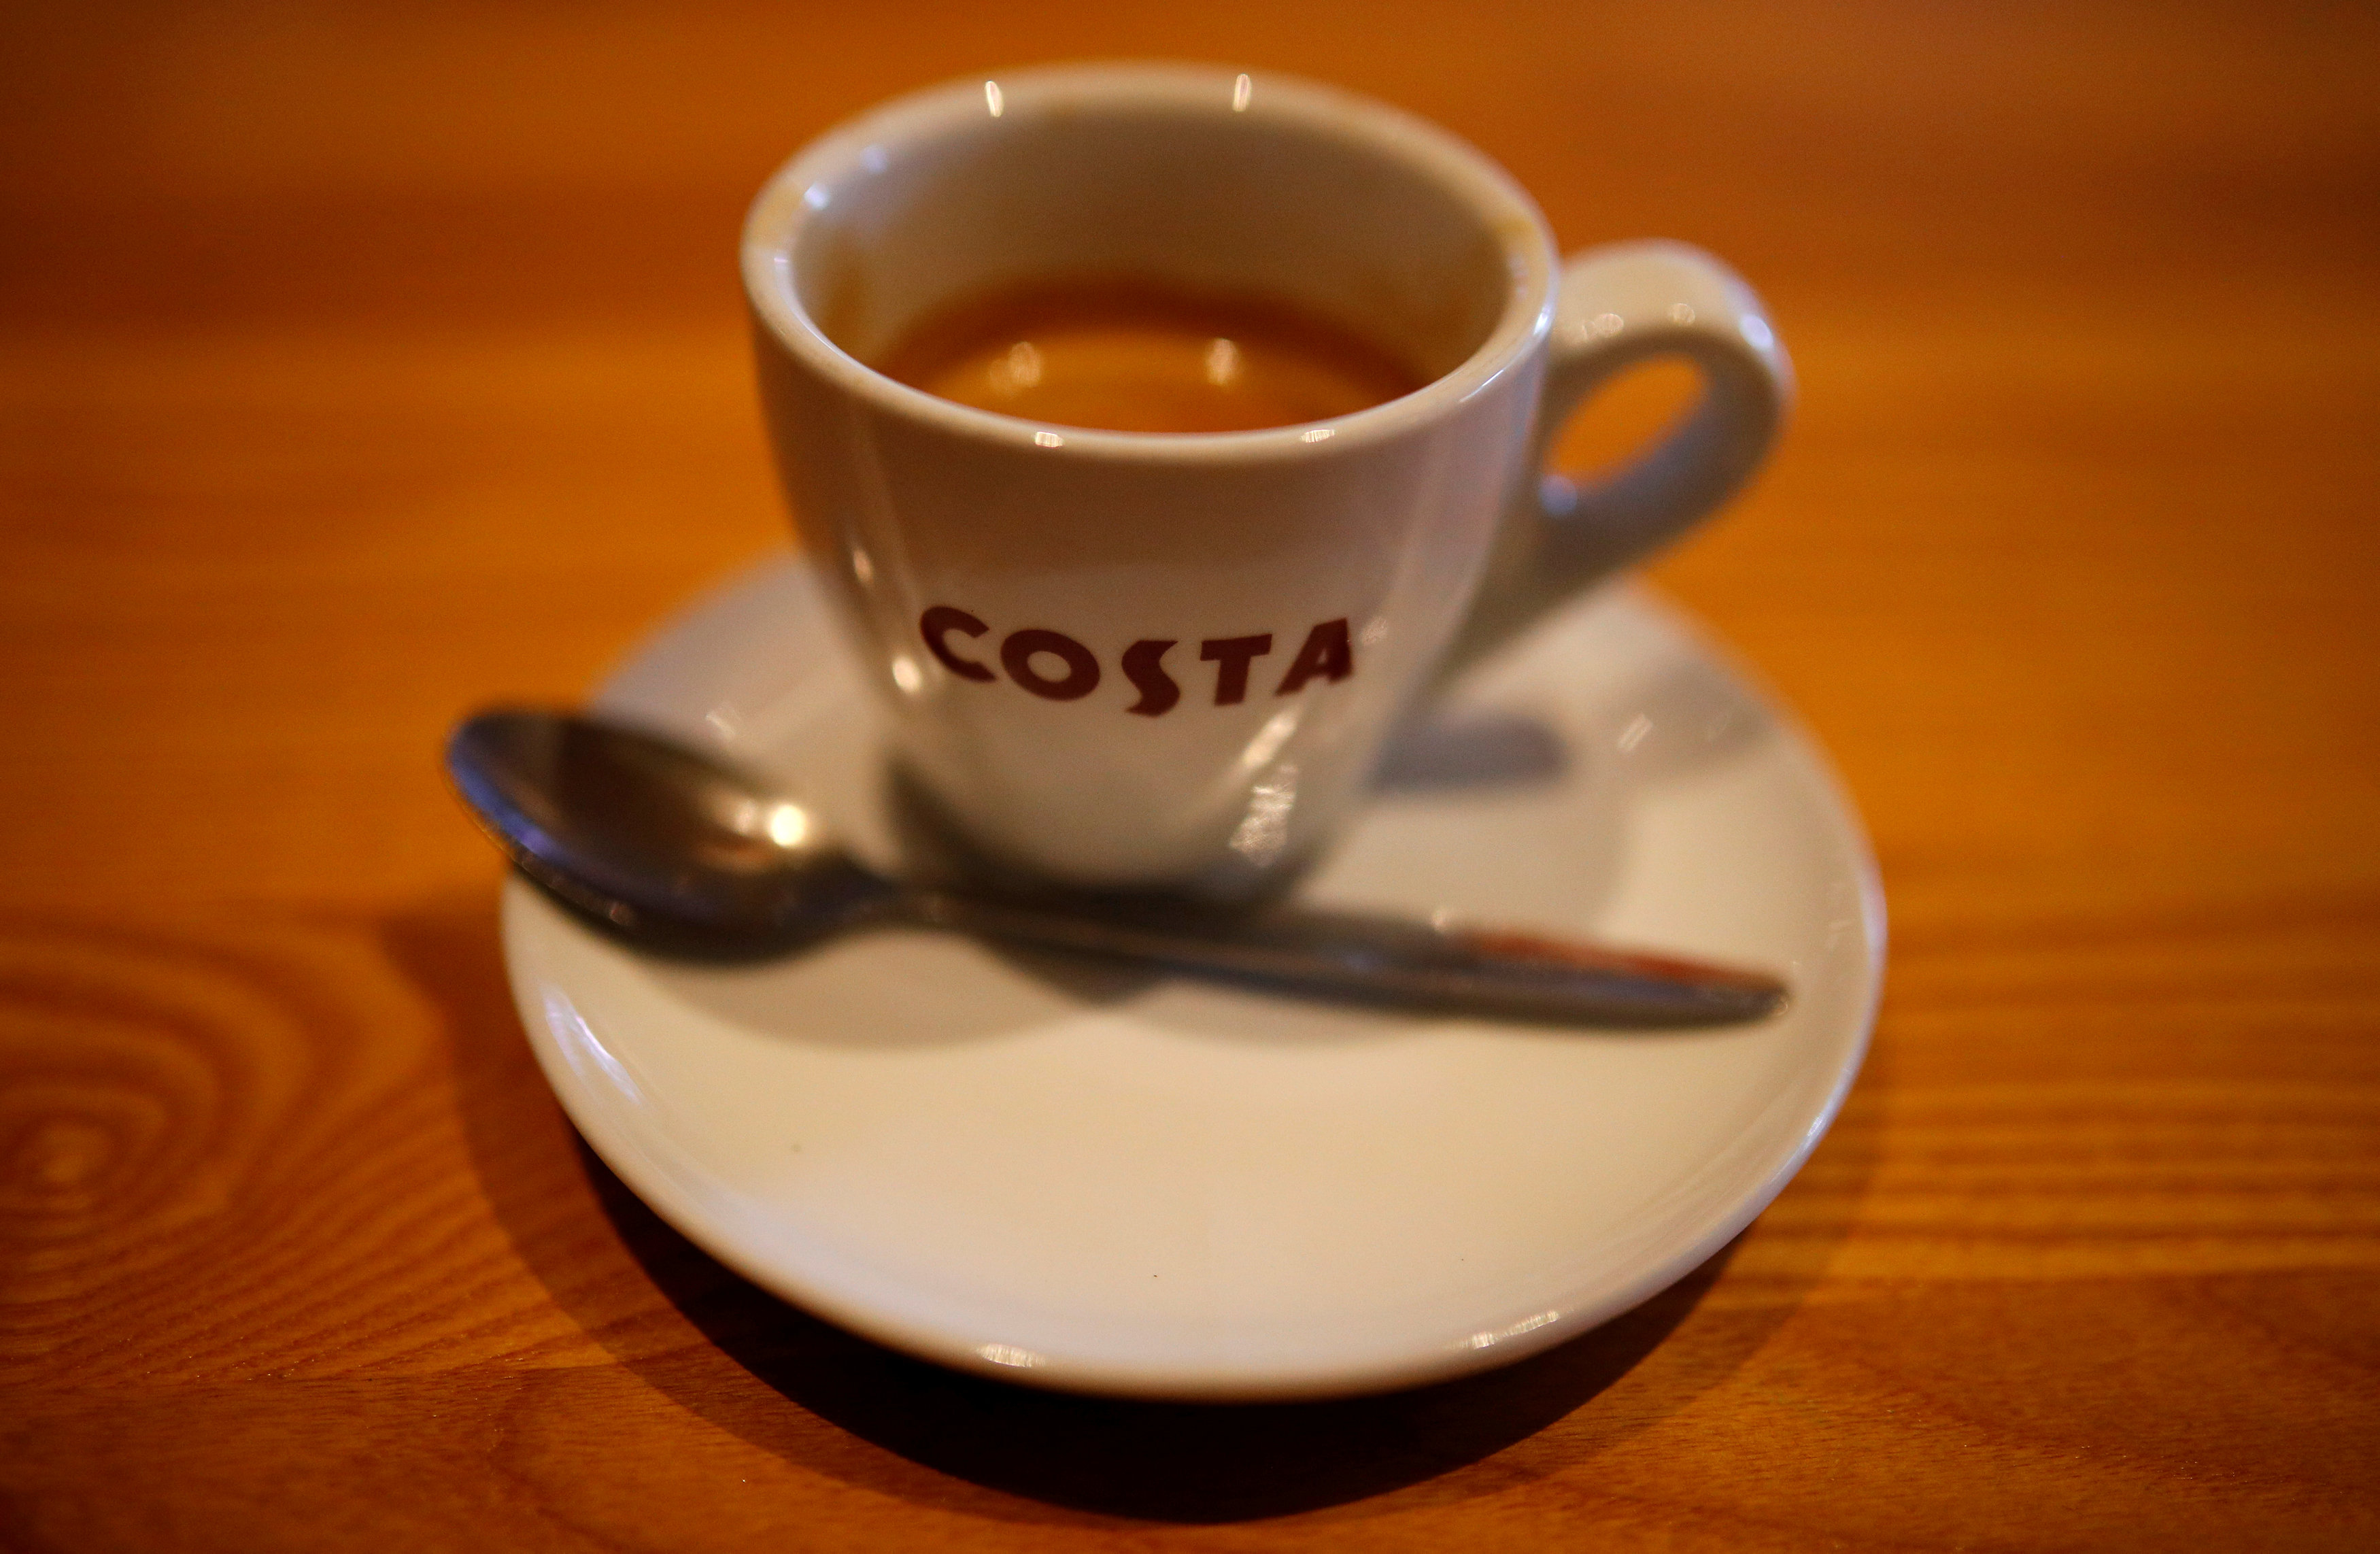 Coca-Cola takes plunge into coffee with $5.1 billion Costa deal